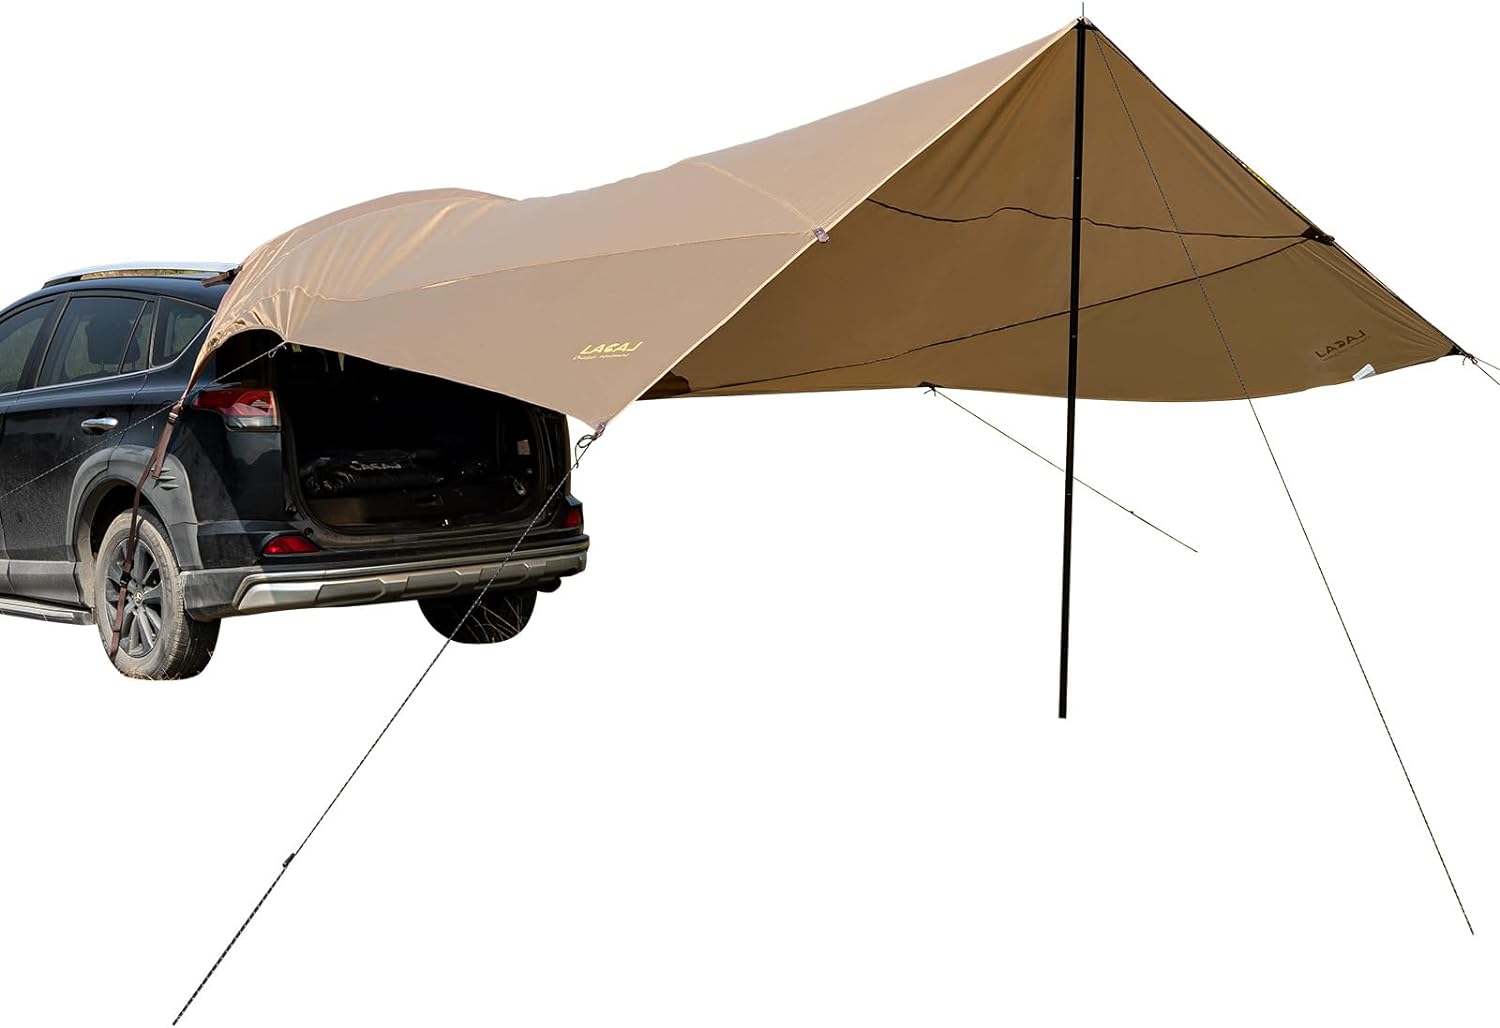 Tailgate Tent,Tailgate Awning, Car Awning Sun Shelter Waterproof 3000MM UPF 50+, for Outdoor Camping, SUV, Truck Van Camper Trailer